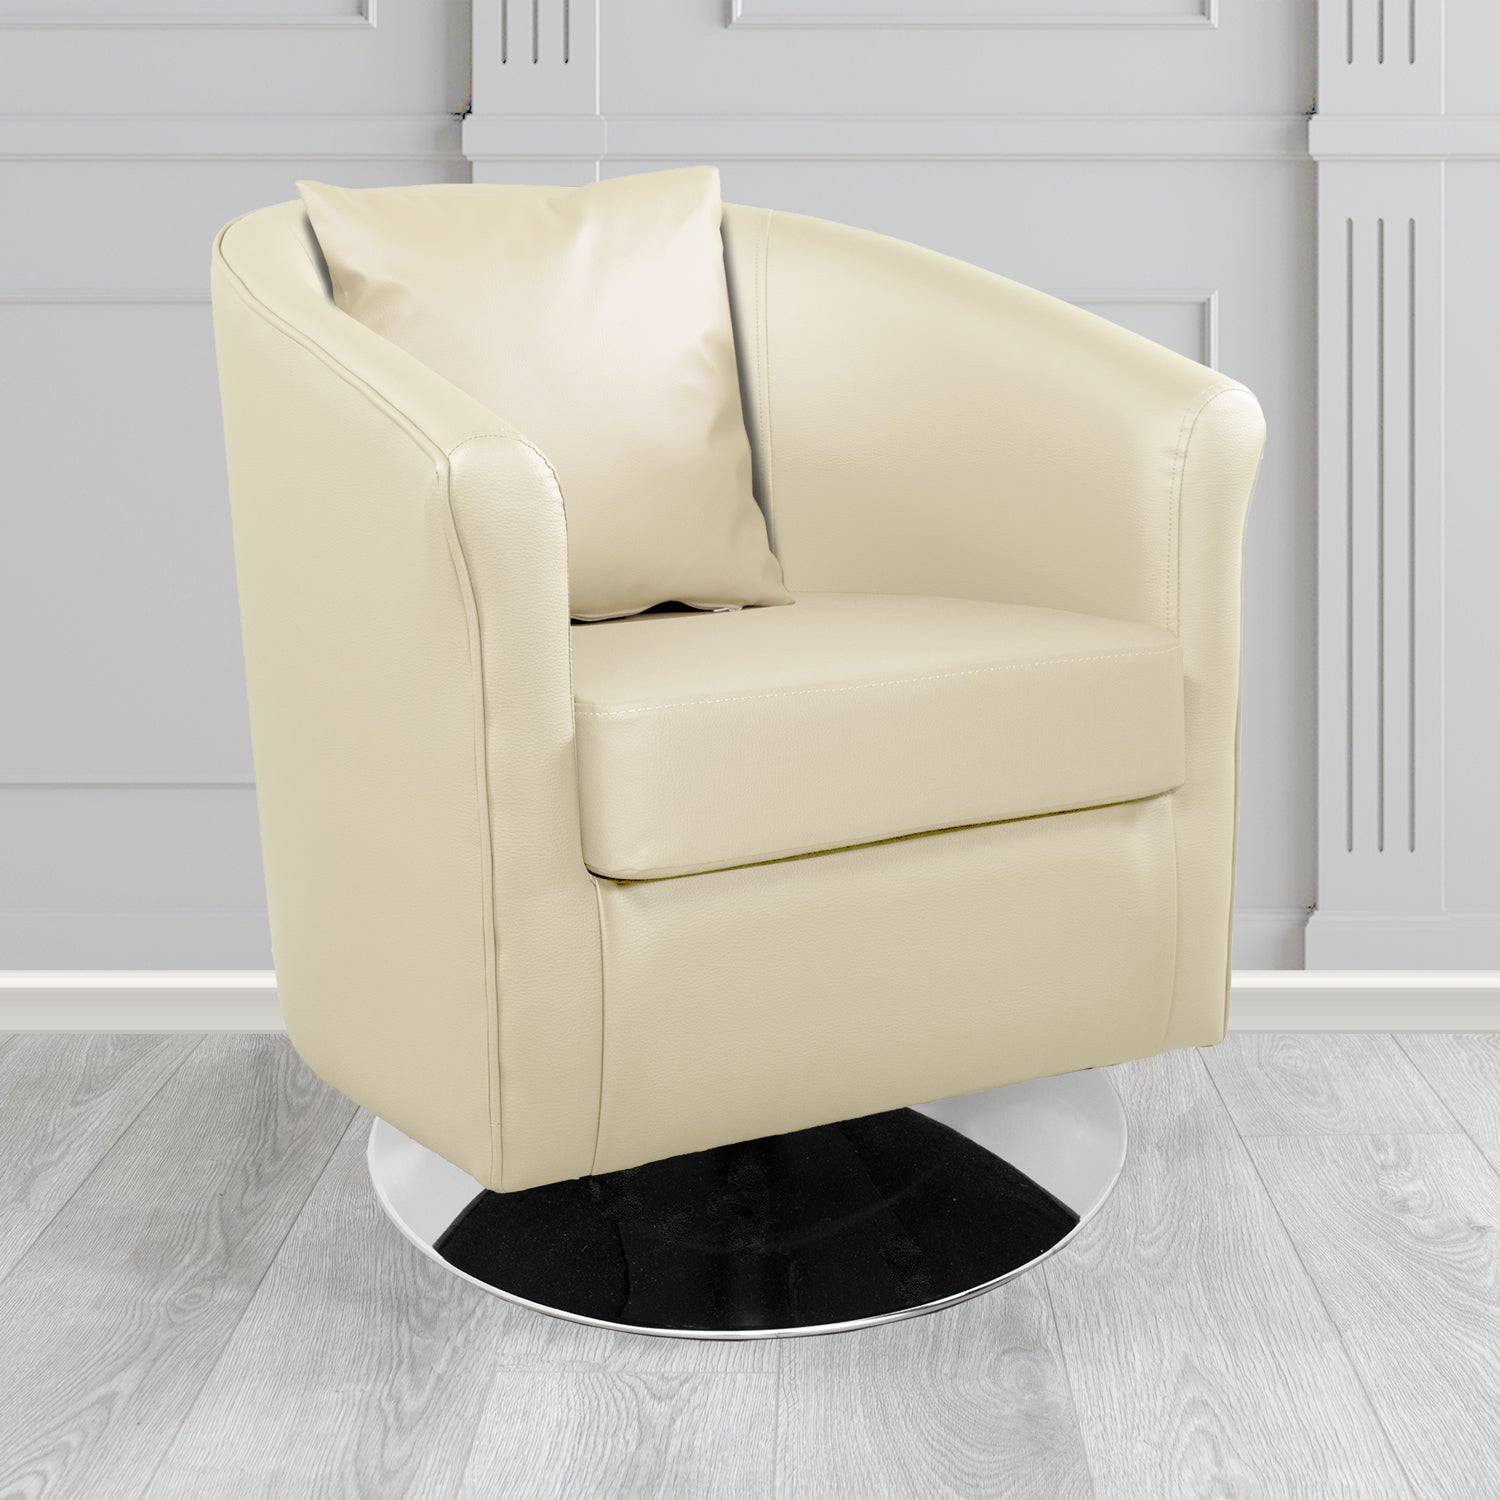 St Tropez Swivel Tub Chair with Scatter Cushion in Madrid Cream Faux Leather - The Tub Chair Shop